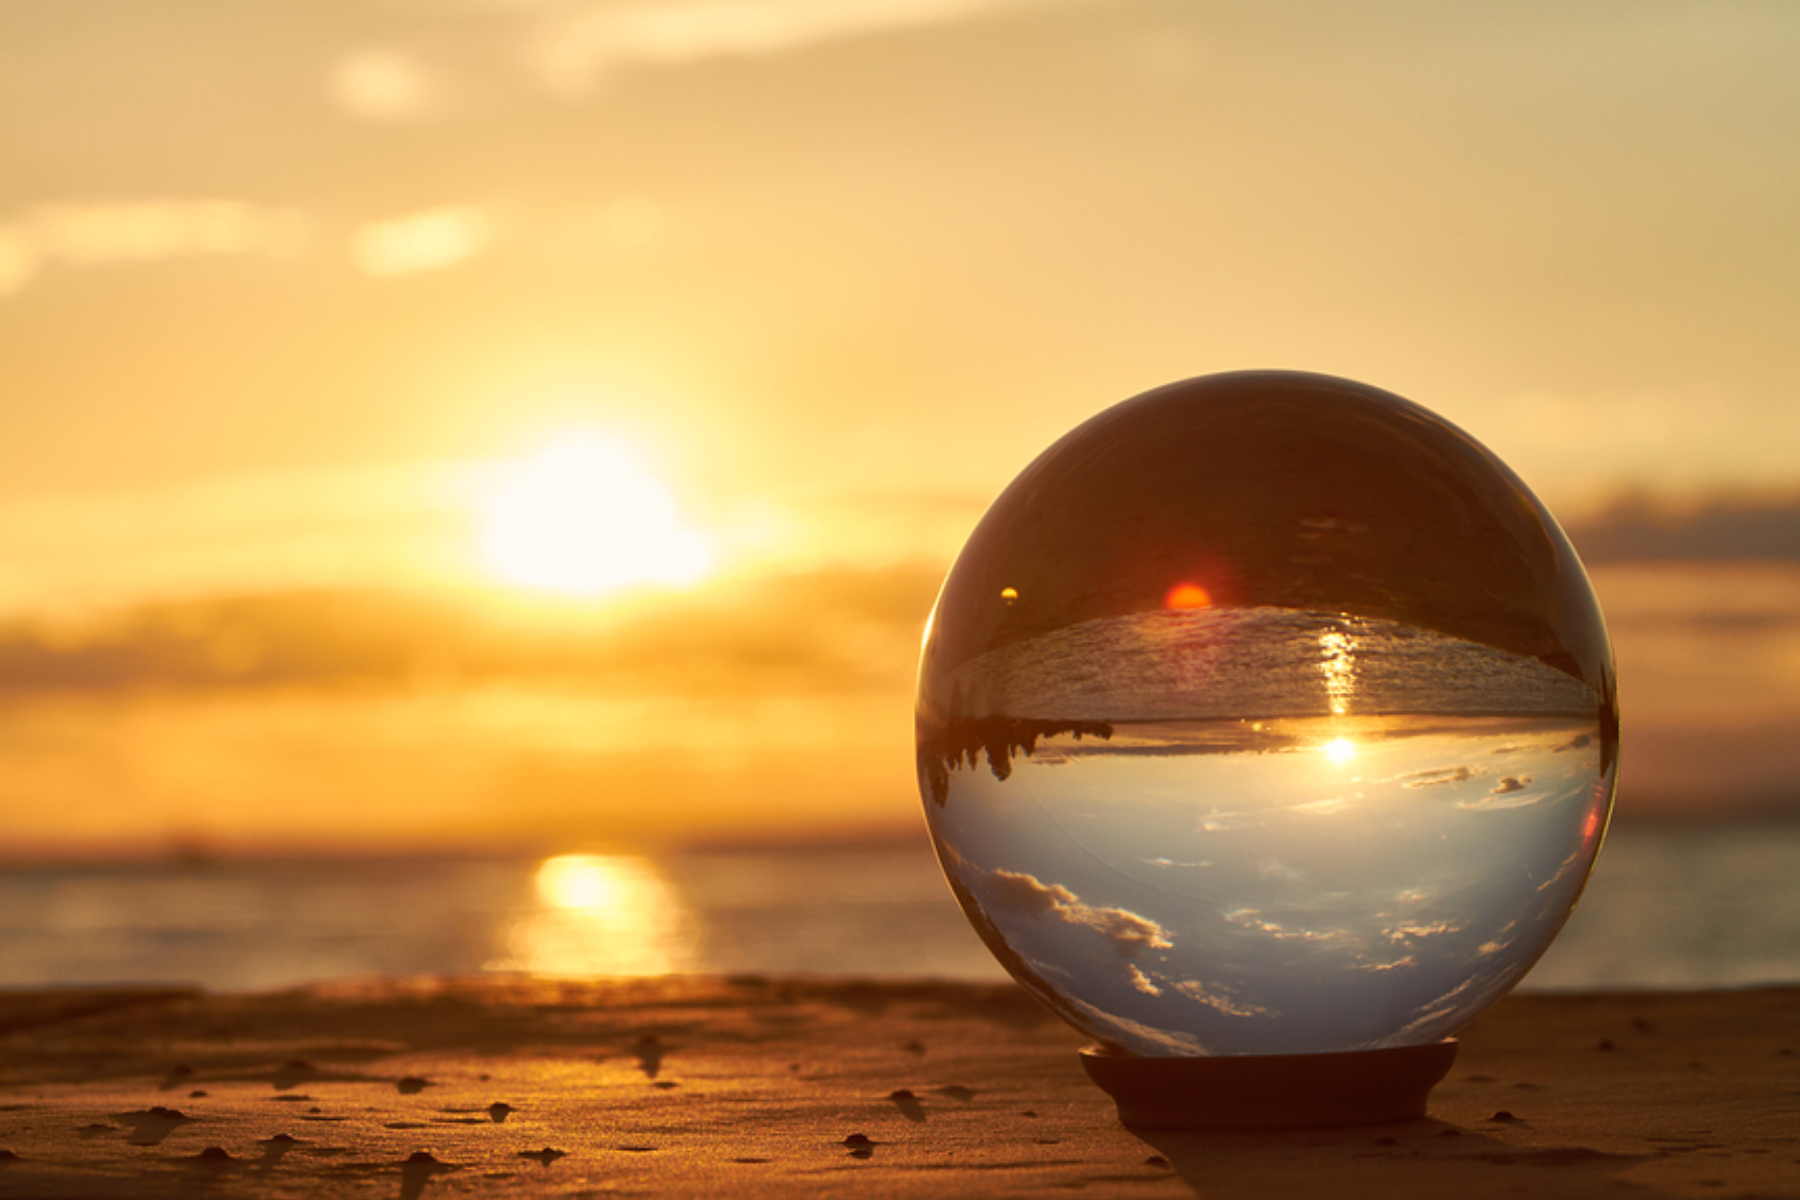 In front of the sunset, a crystal ball